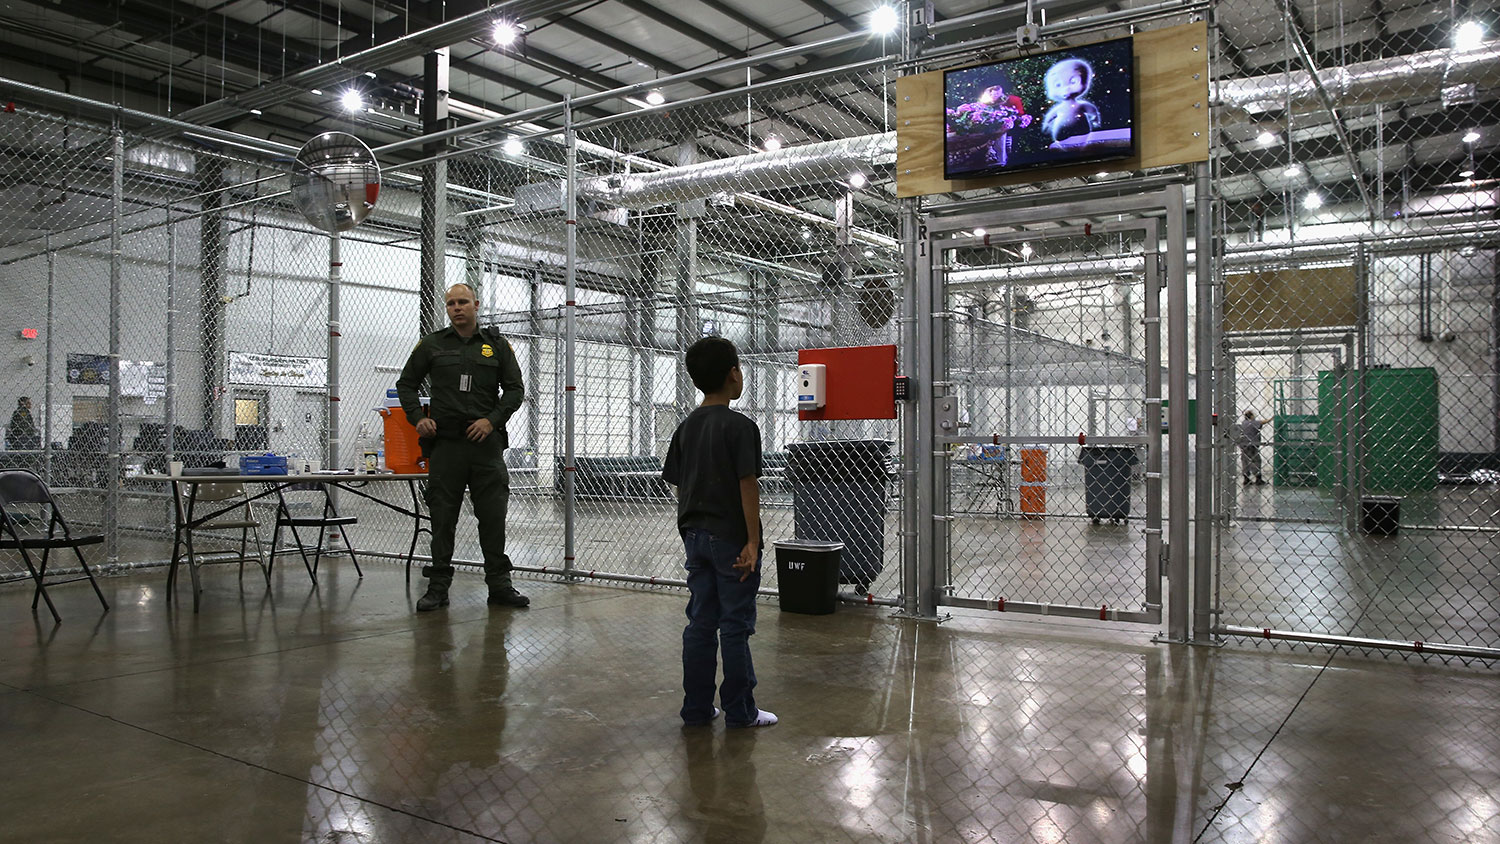 A boy from Honduras watches a movie at a detention facility run by the U.S. Border Patrol on Sept. 8, 2014, in McAllen, Texas.
